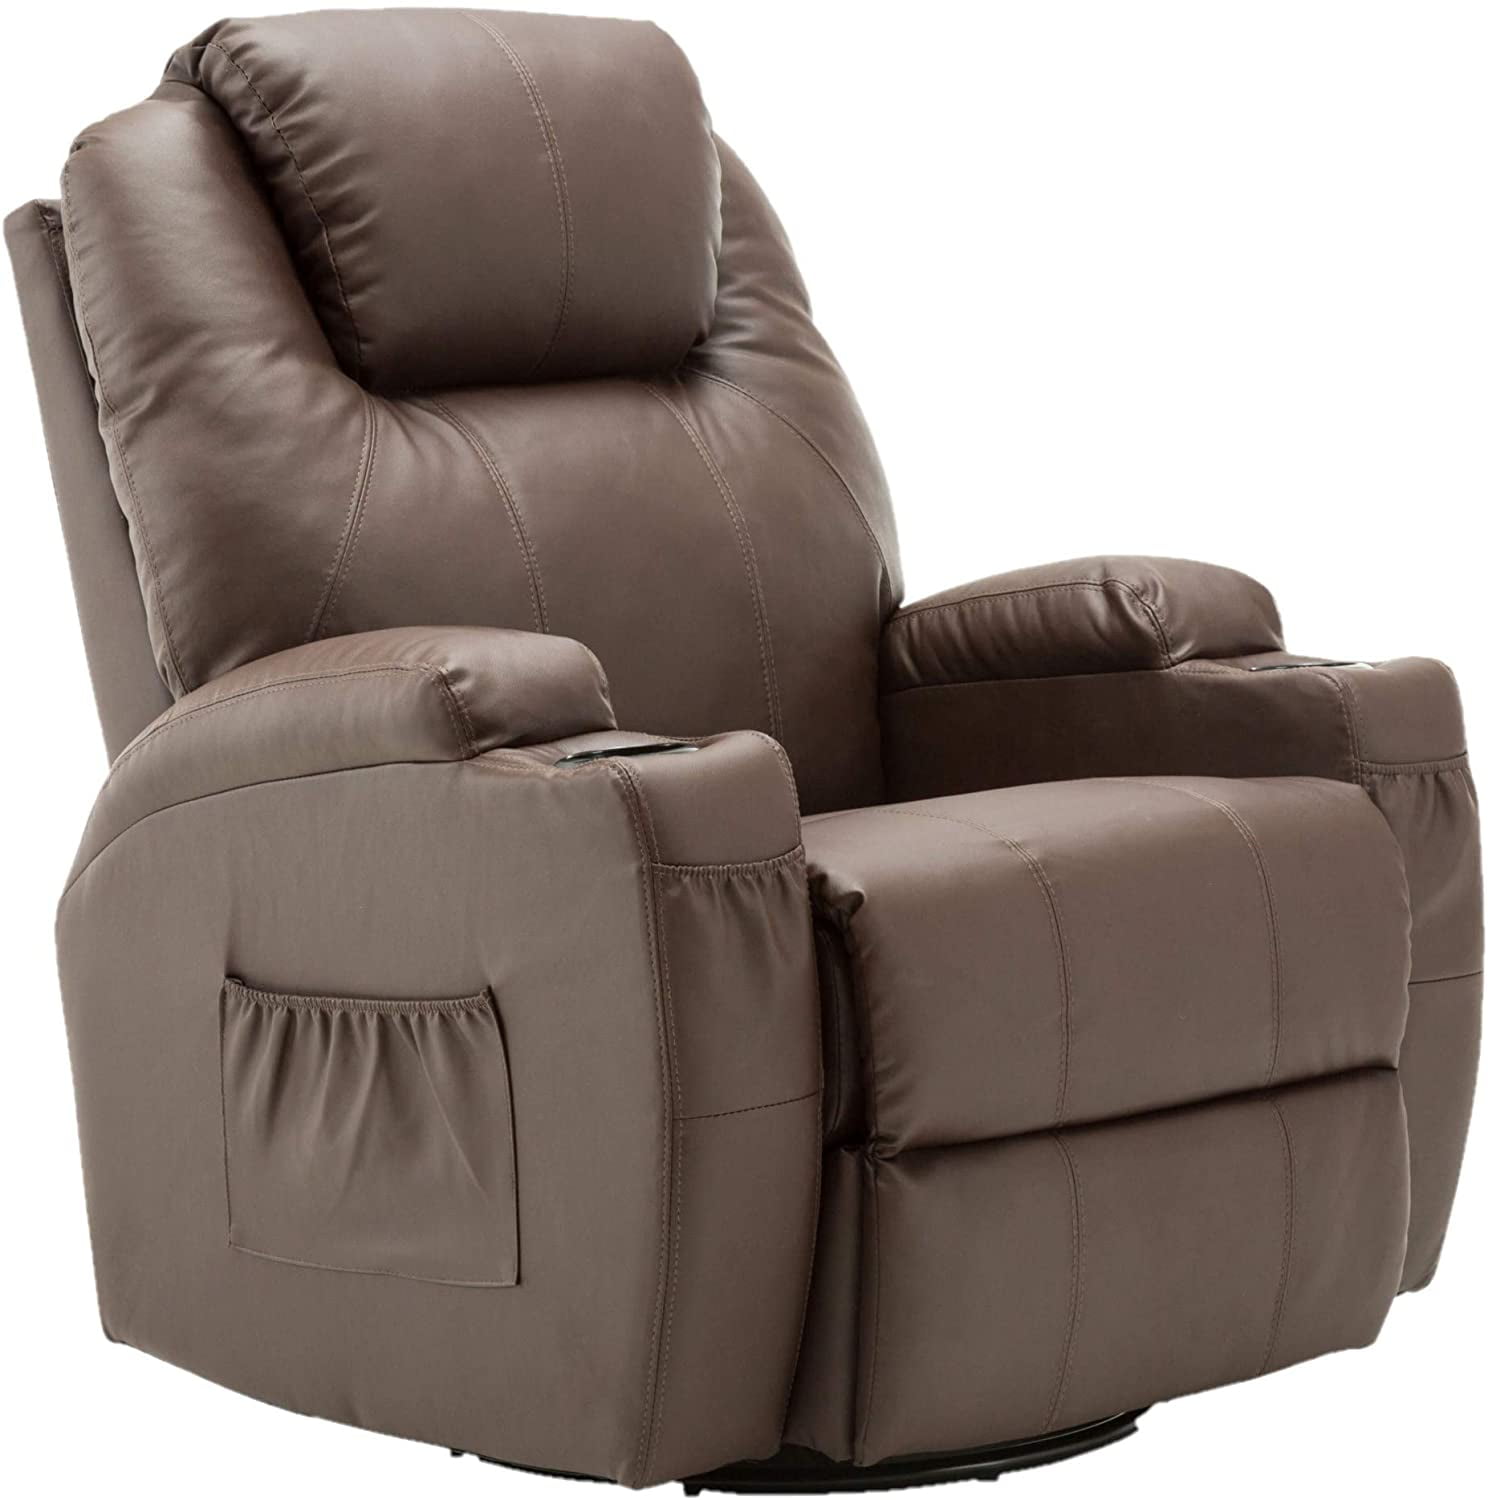 Mcombo Faux Leather Recliner Brown, Swivel Leather Recliners